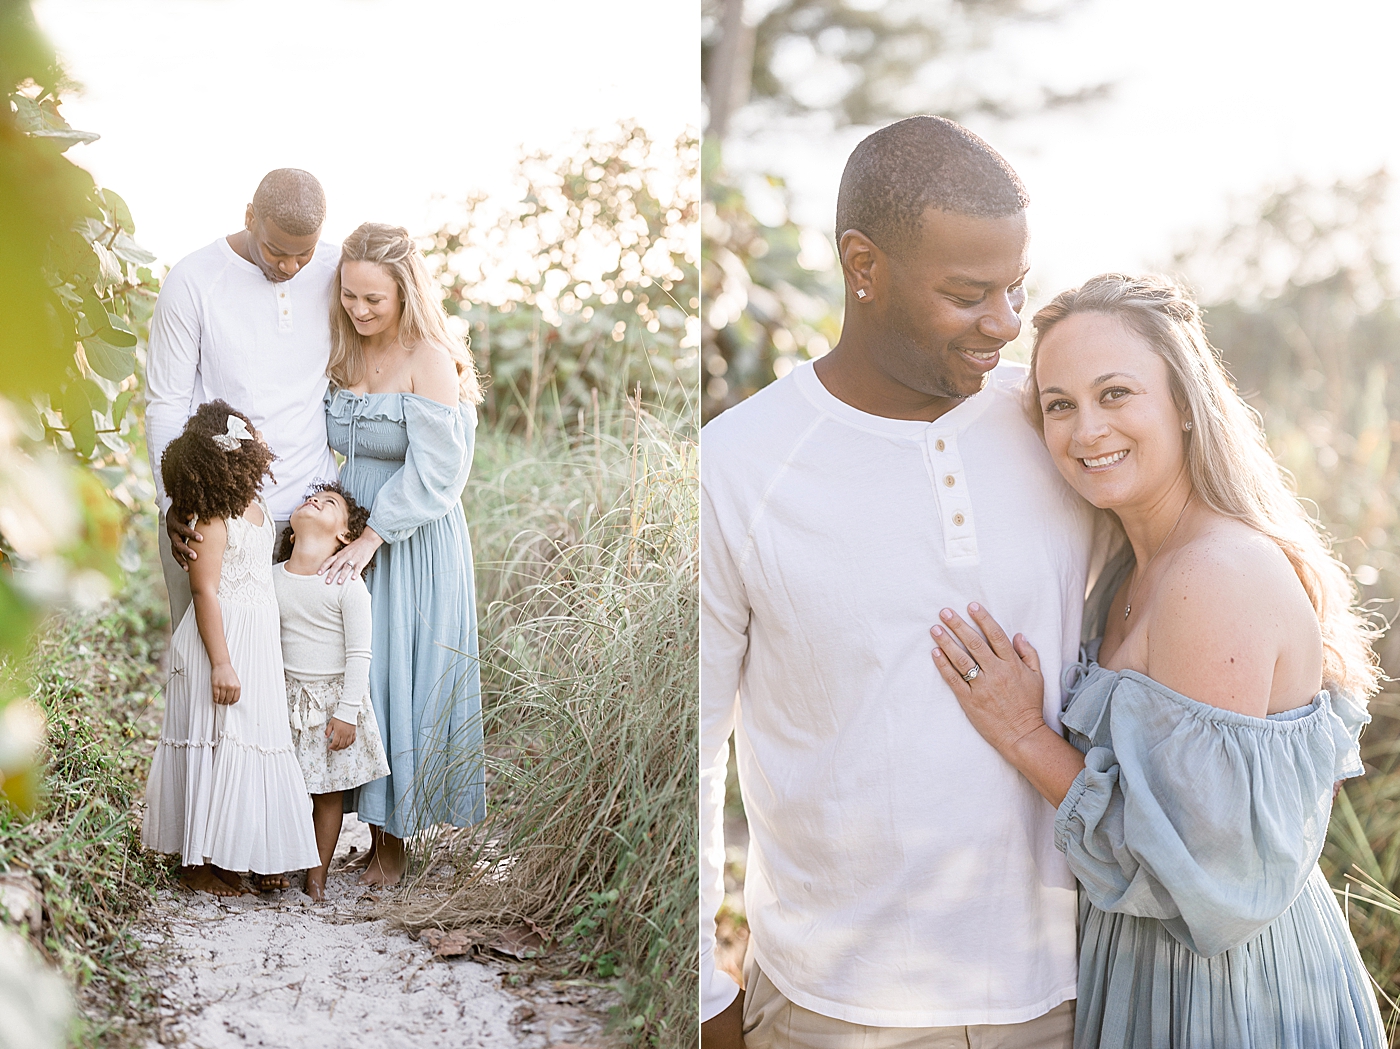 Girls looking up at their parents and sweet moment of them during family photos. Photo by Brittany Elise Photography.